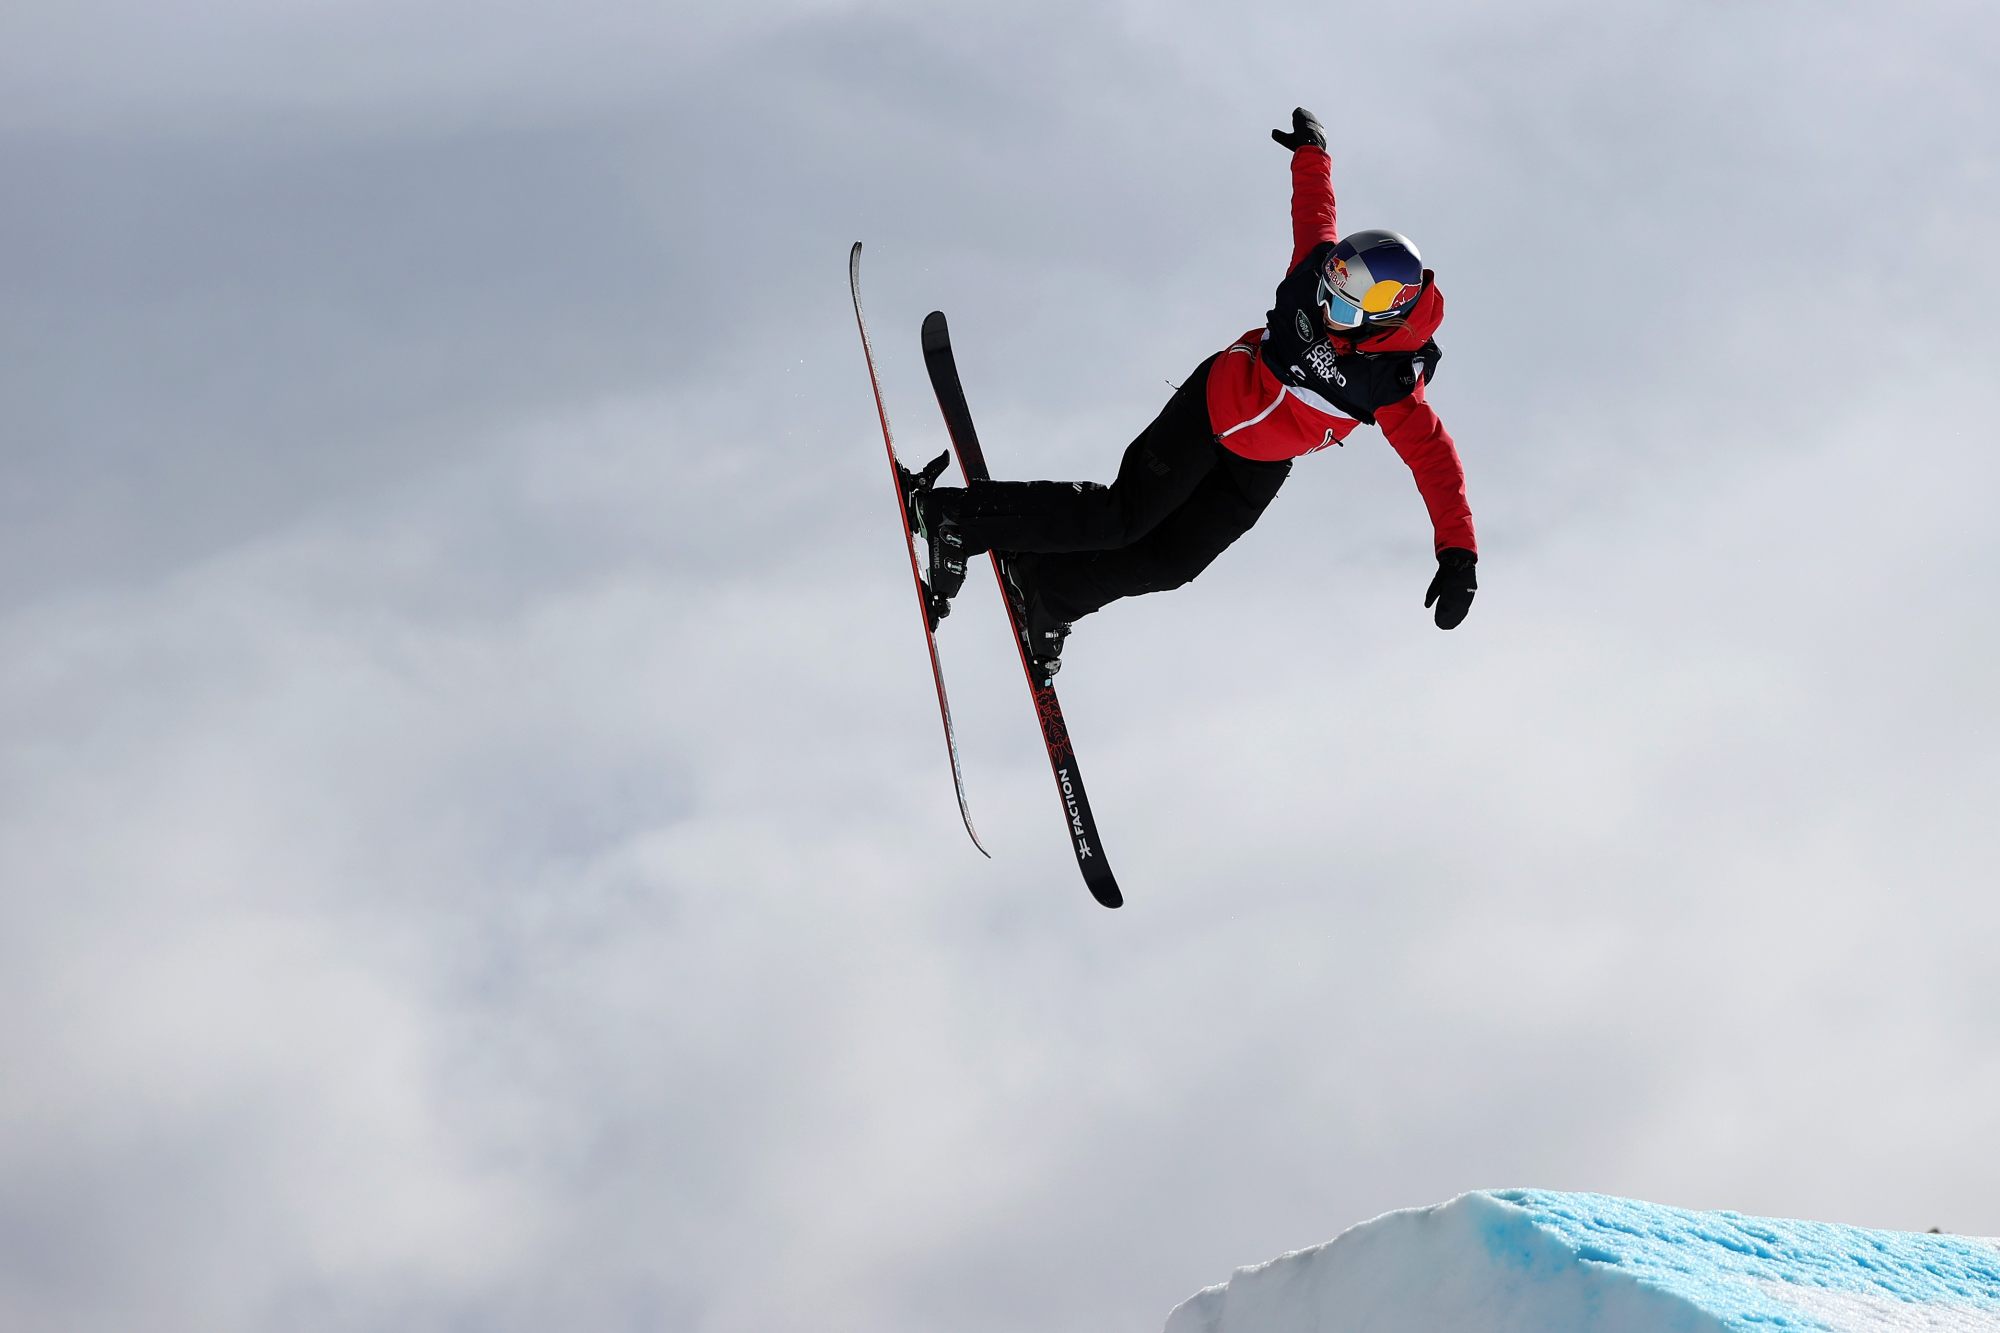 Eileen Gu of China in the women’s freeski slopestyle final at the US Grand Prix World Cup at Buttermilk Ski Resort in Aspen, Colorado in March. Photo: AFP